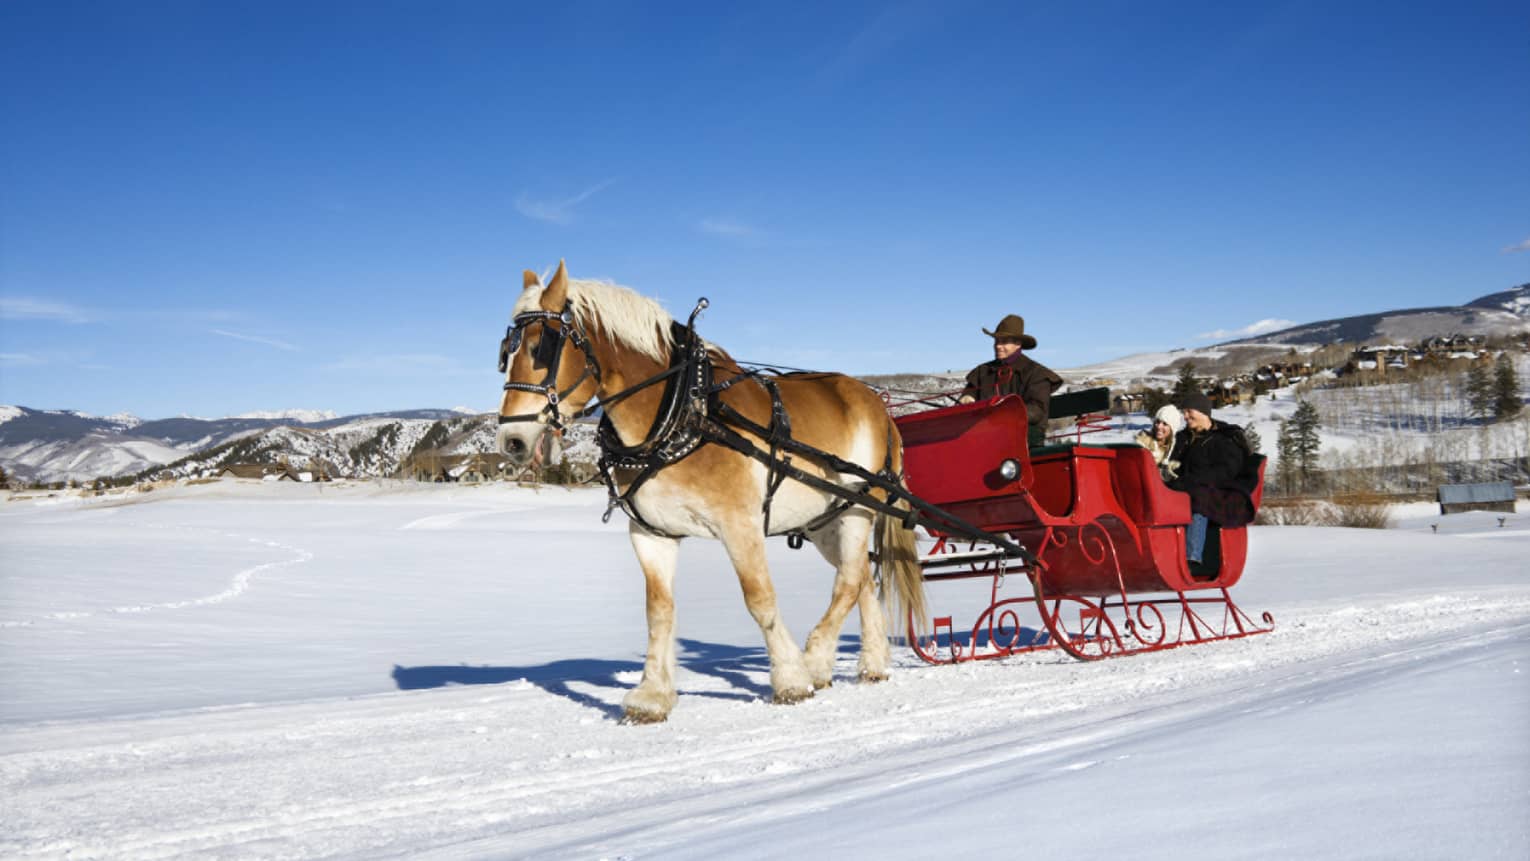 A horse pulling a red coloured sleigh with three people on it through white snow.